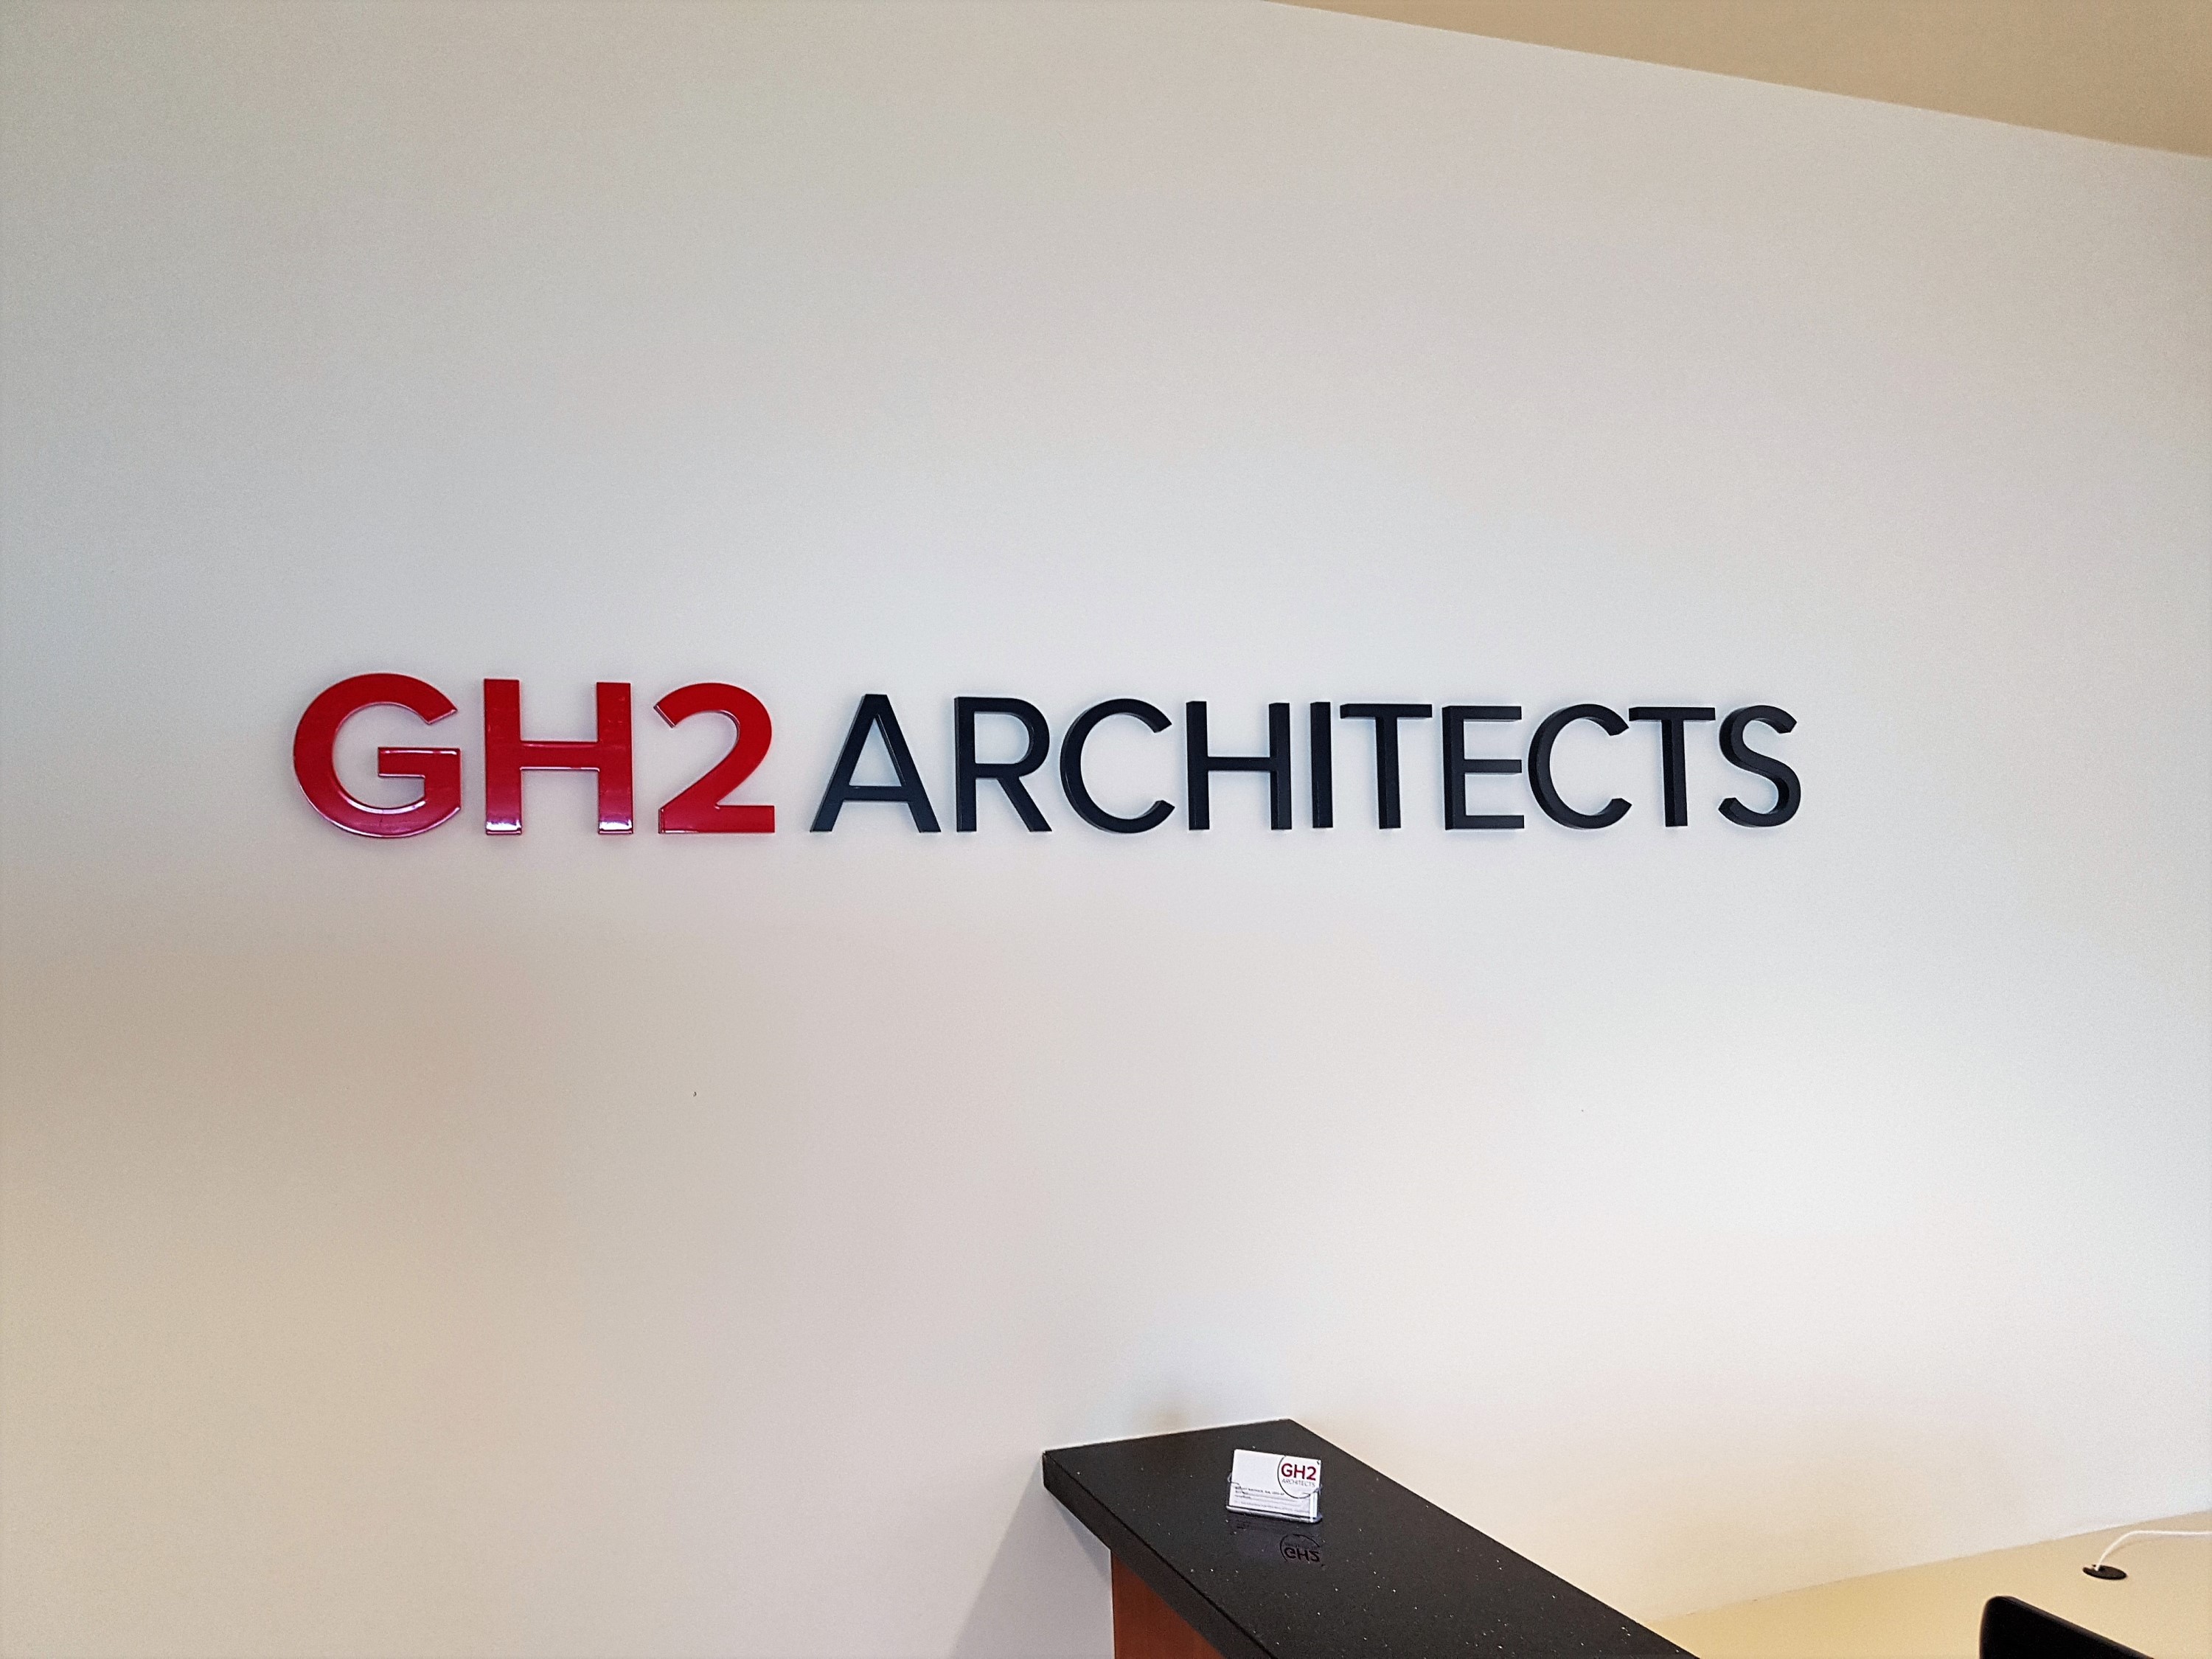 GH2 Architects indoor wall lettering